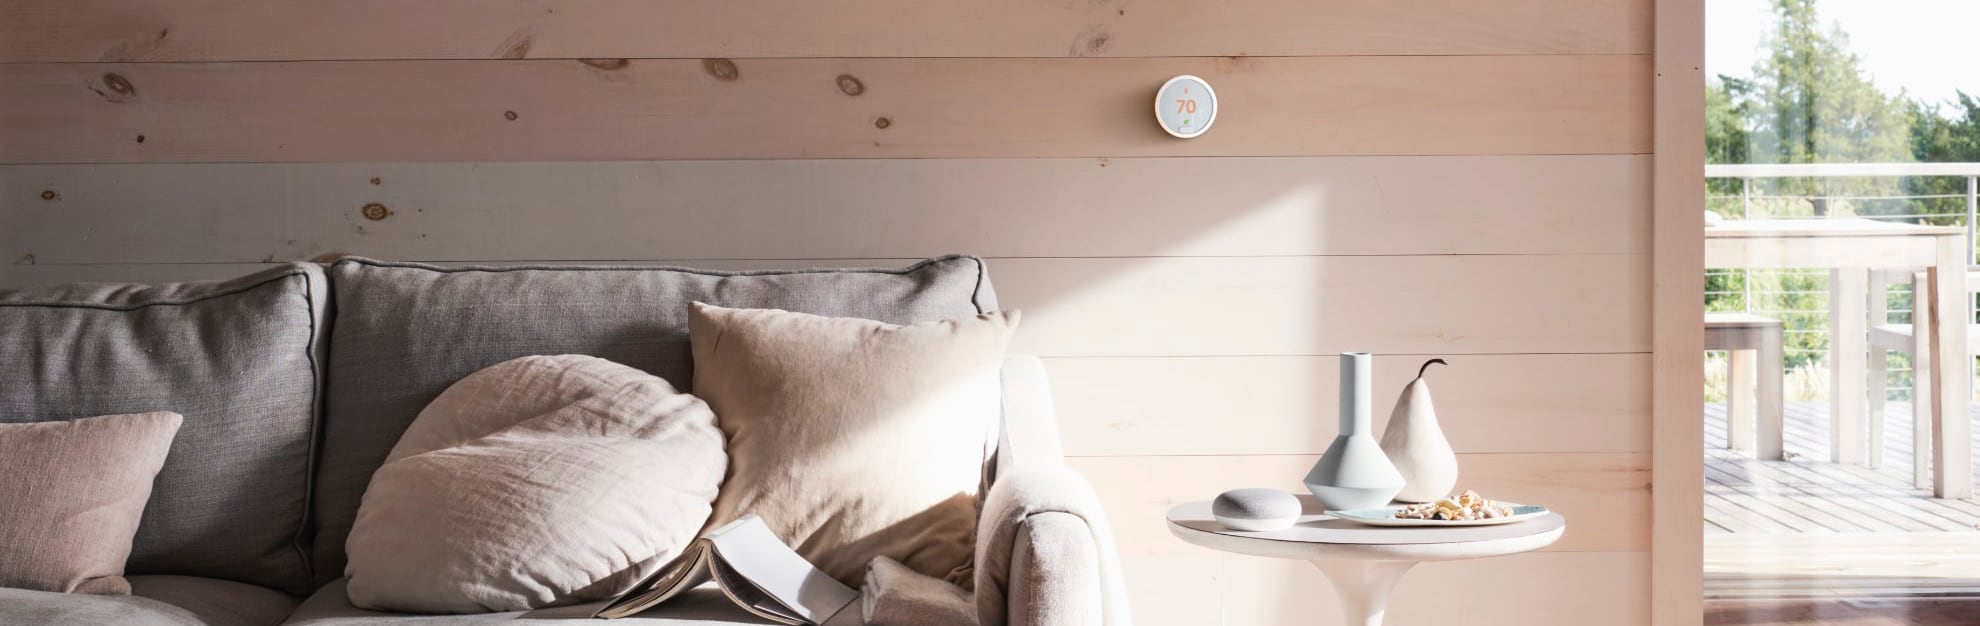 Vivint Home Automation in Toledo